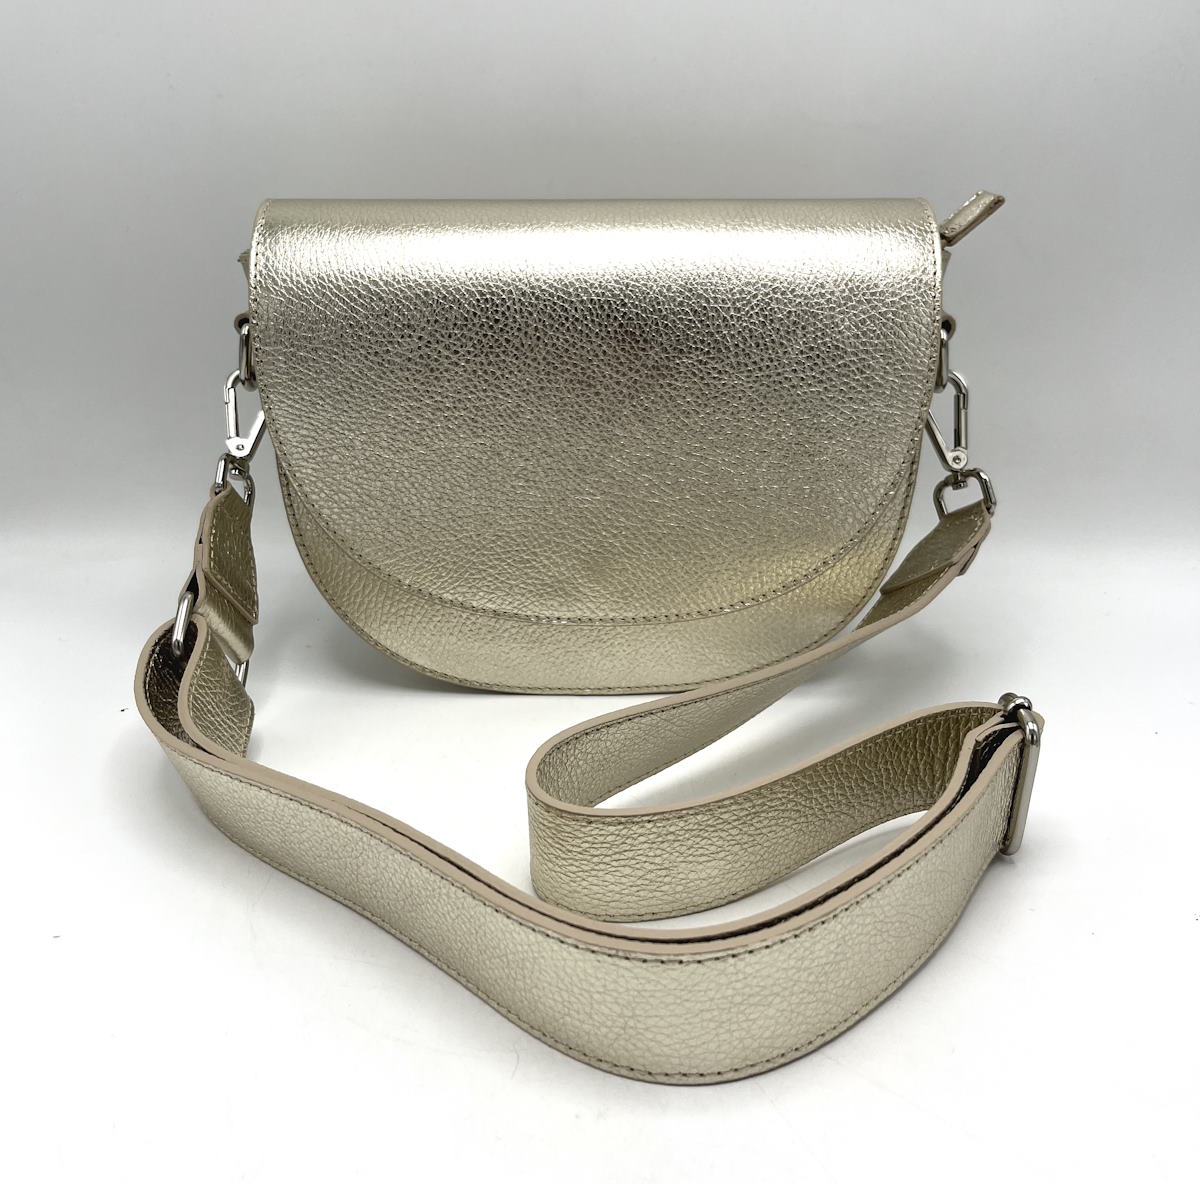 Genuine leather shoulder bag, for women, made in Italy, art. 112431